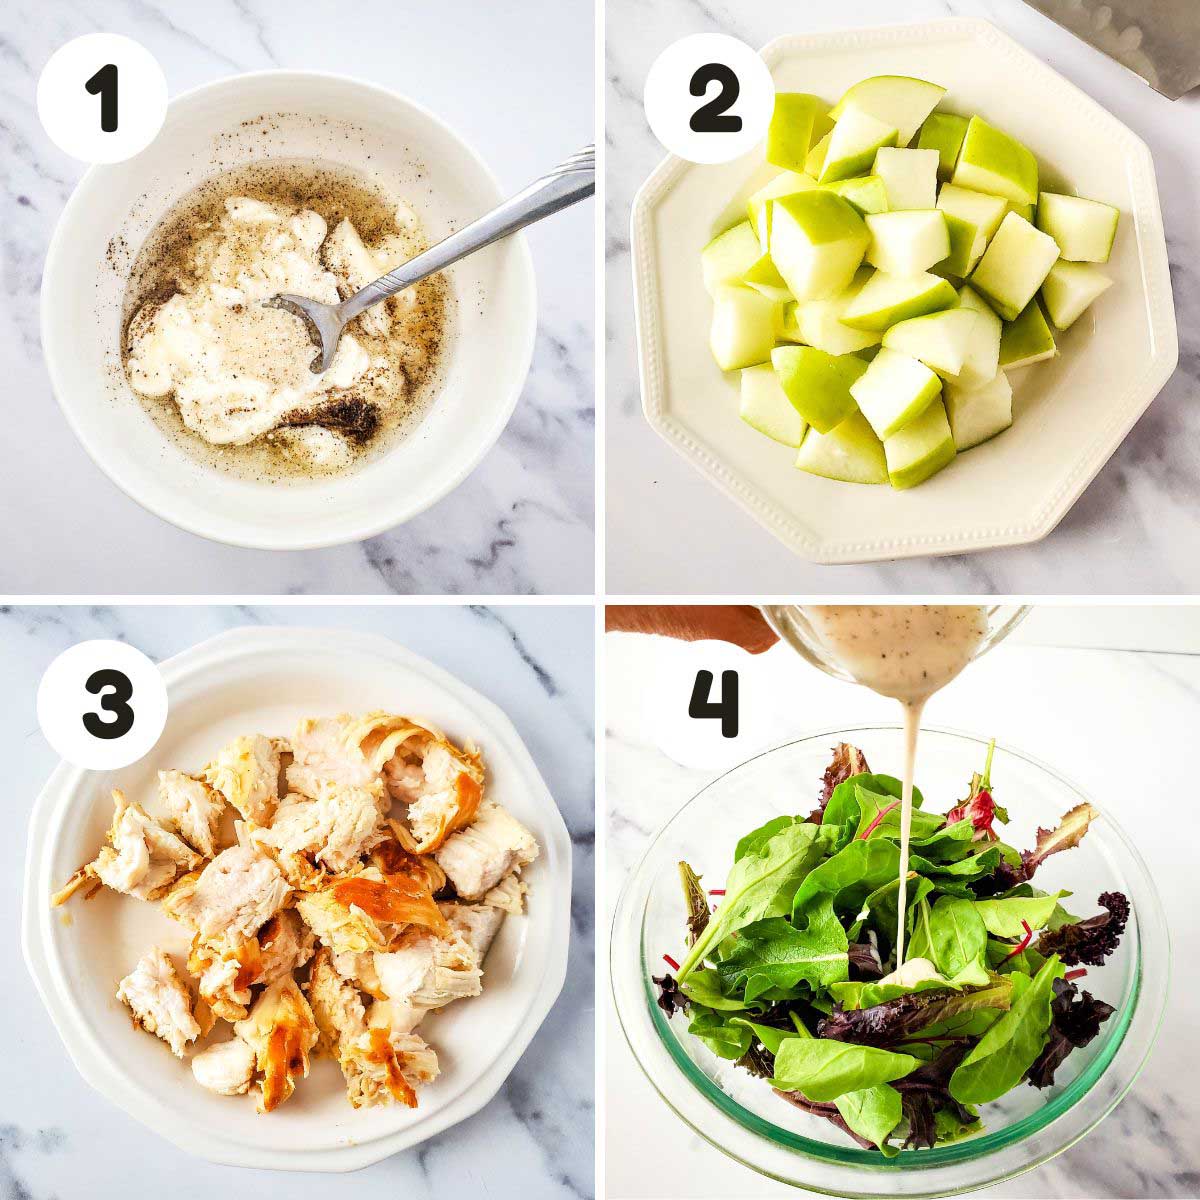 Steps to make the chicken salad.